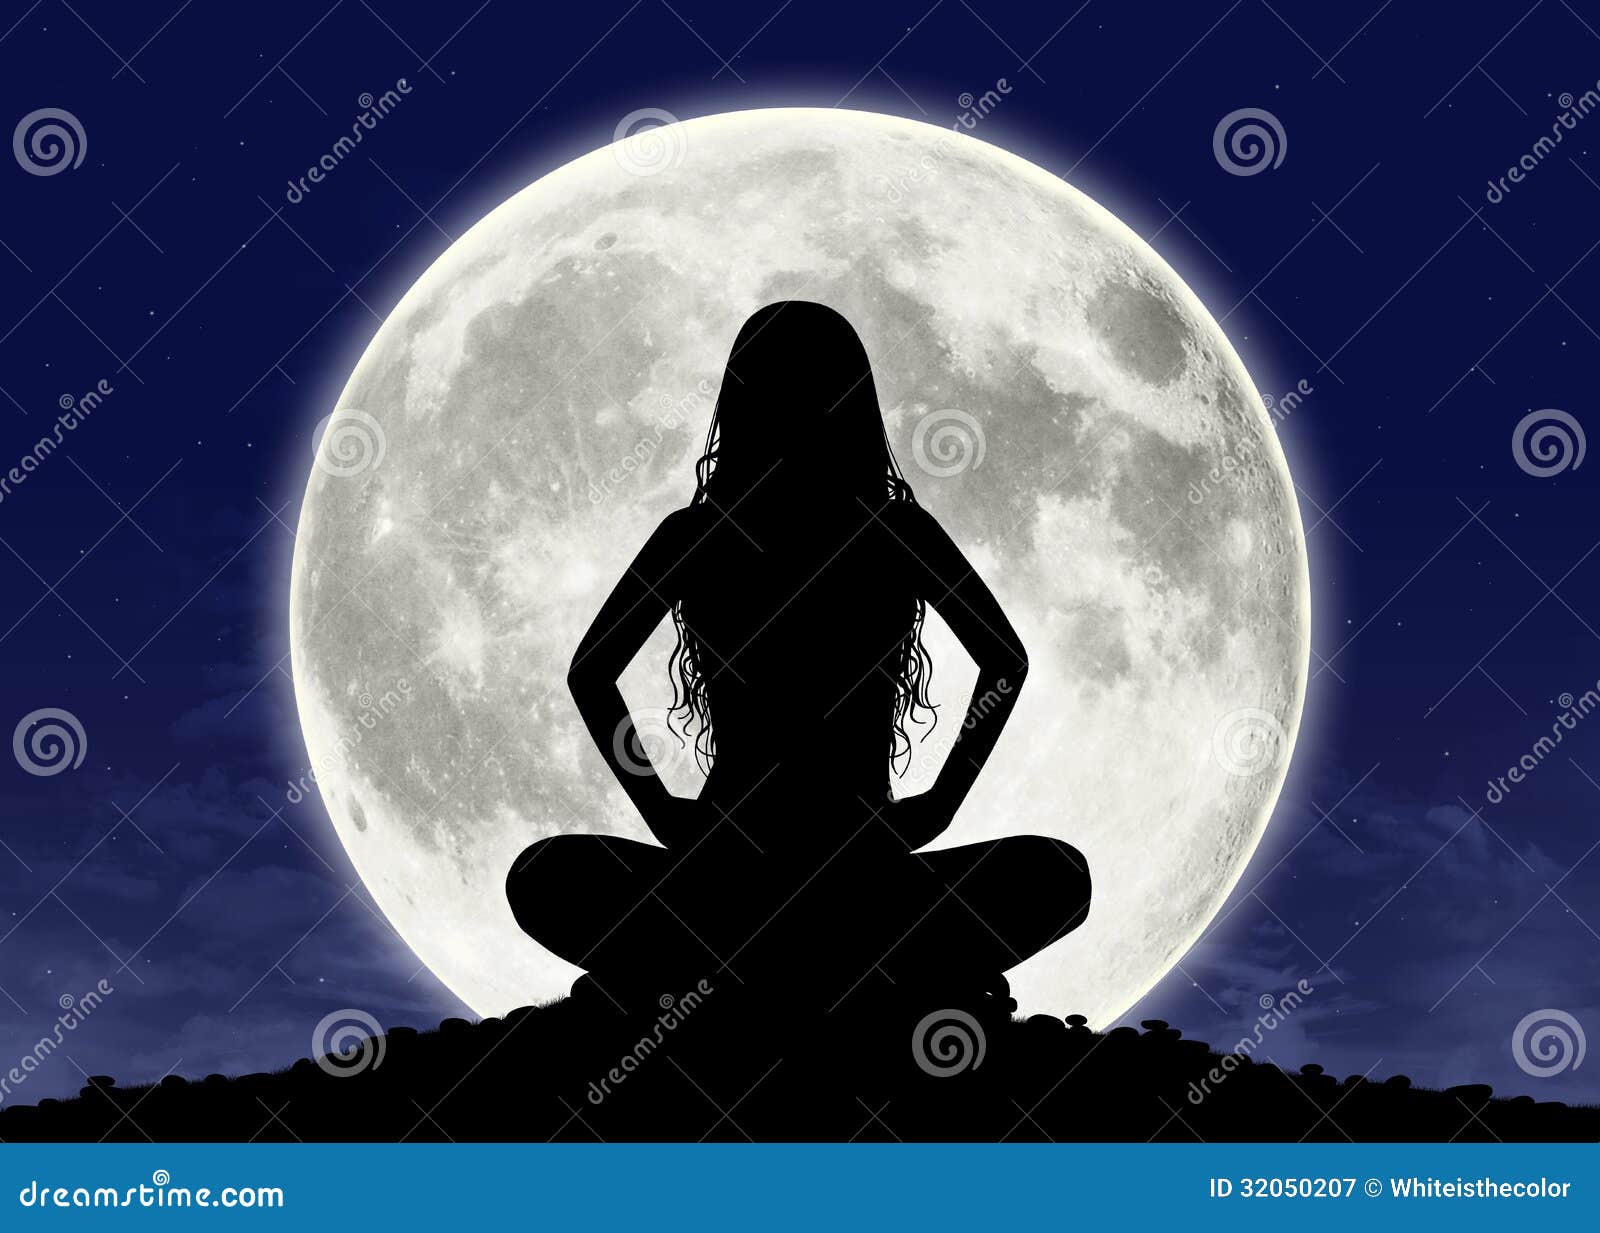 young woman in meditation at the full moon